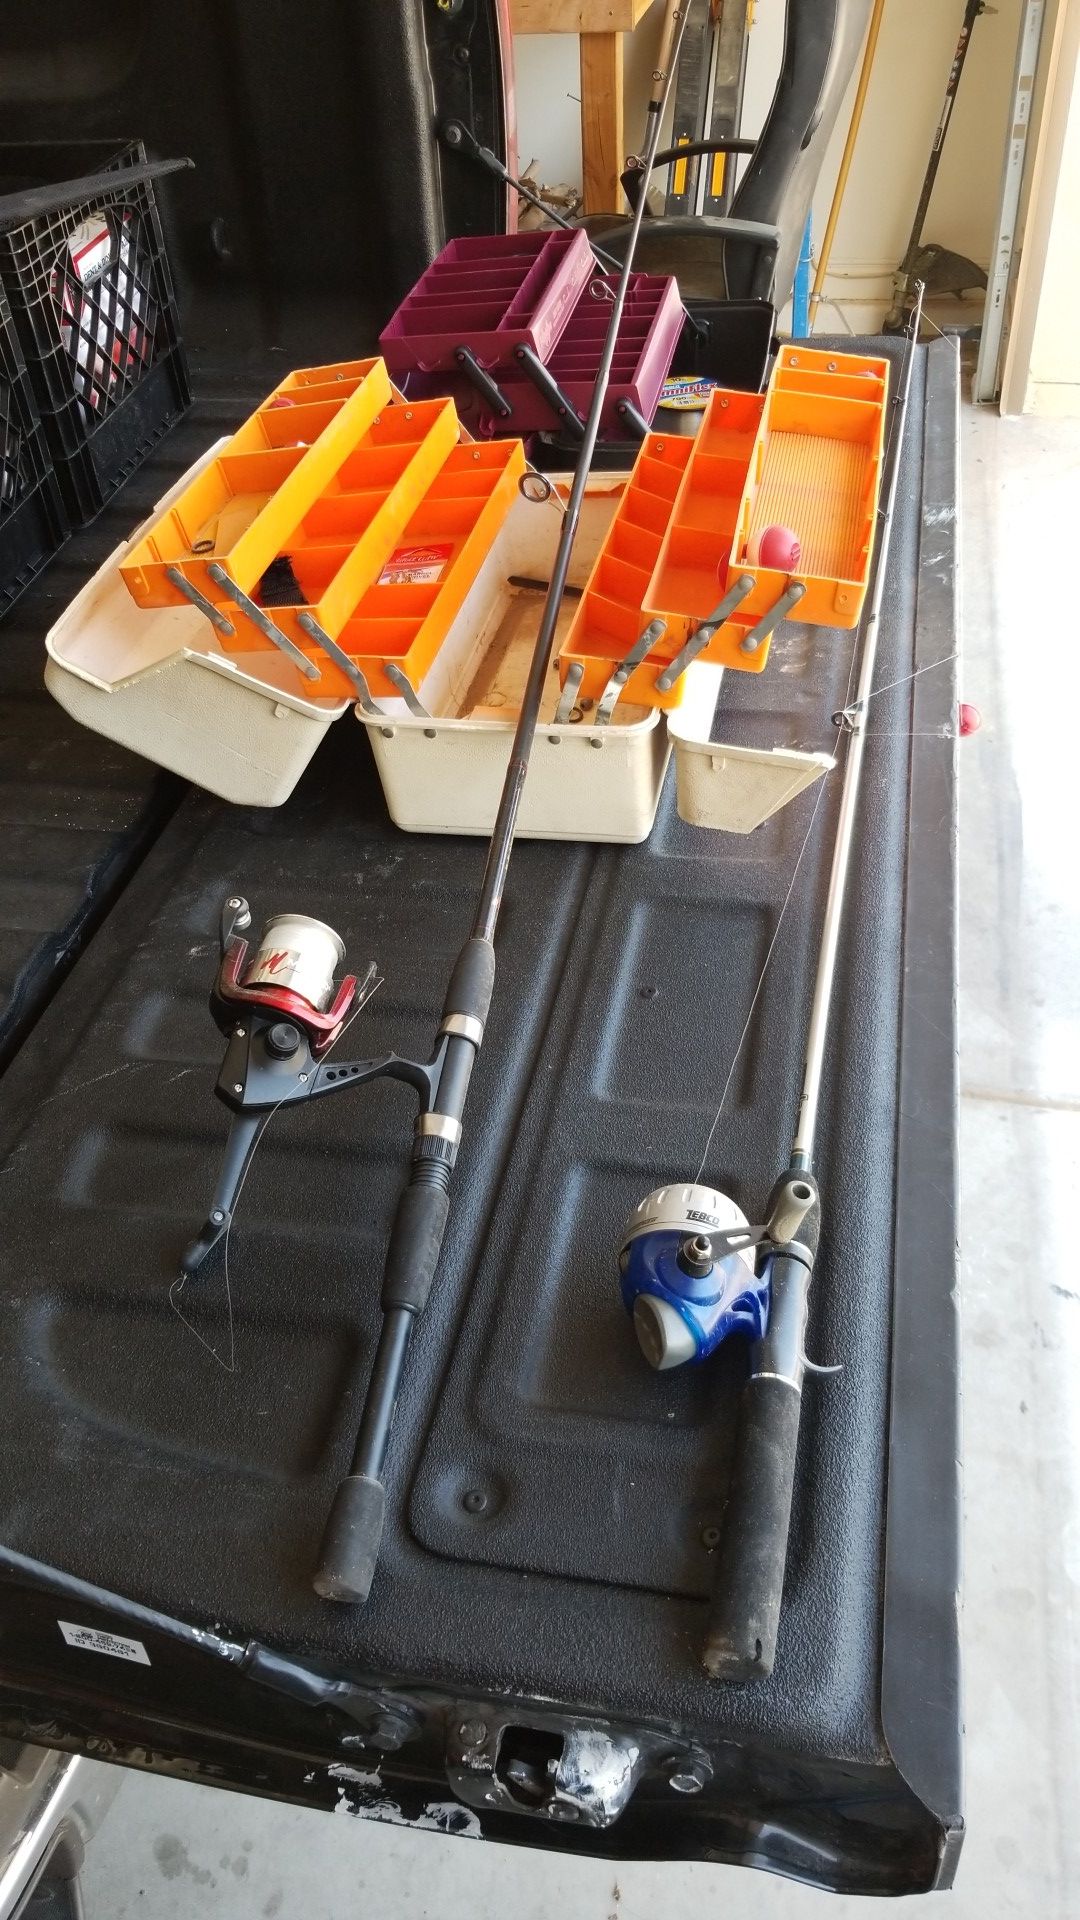 Fishing rods, tackle boxes, and misc. Accessories